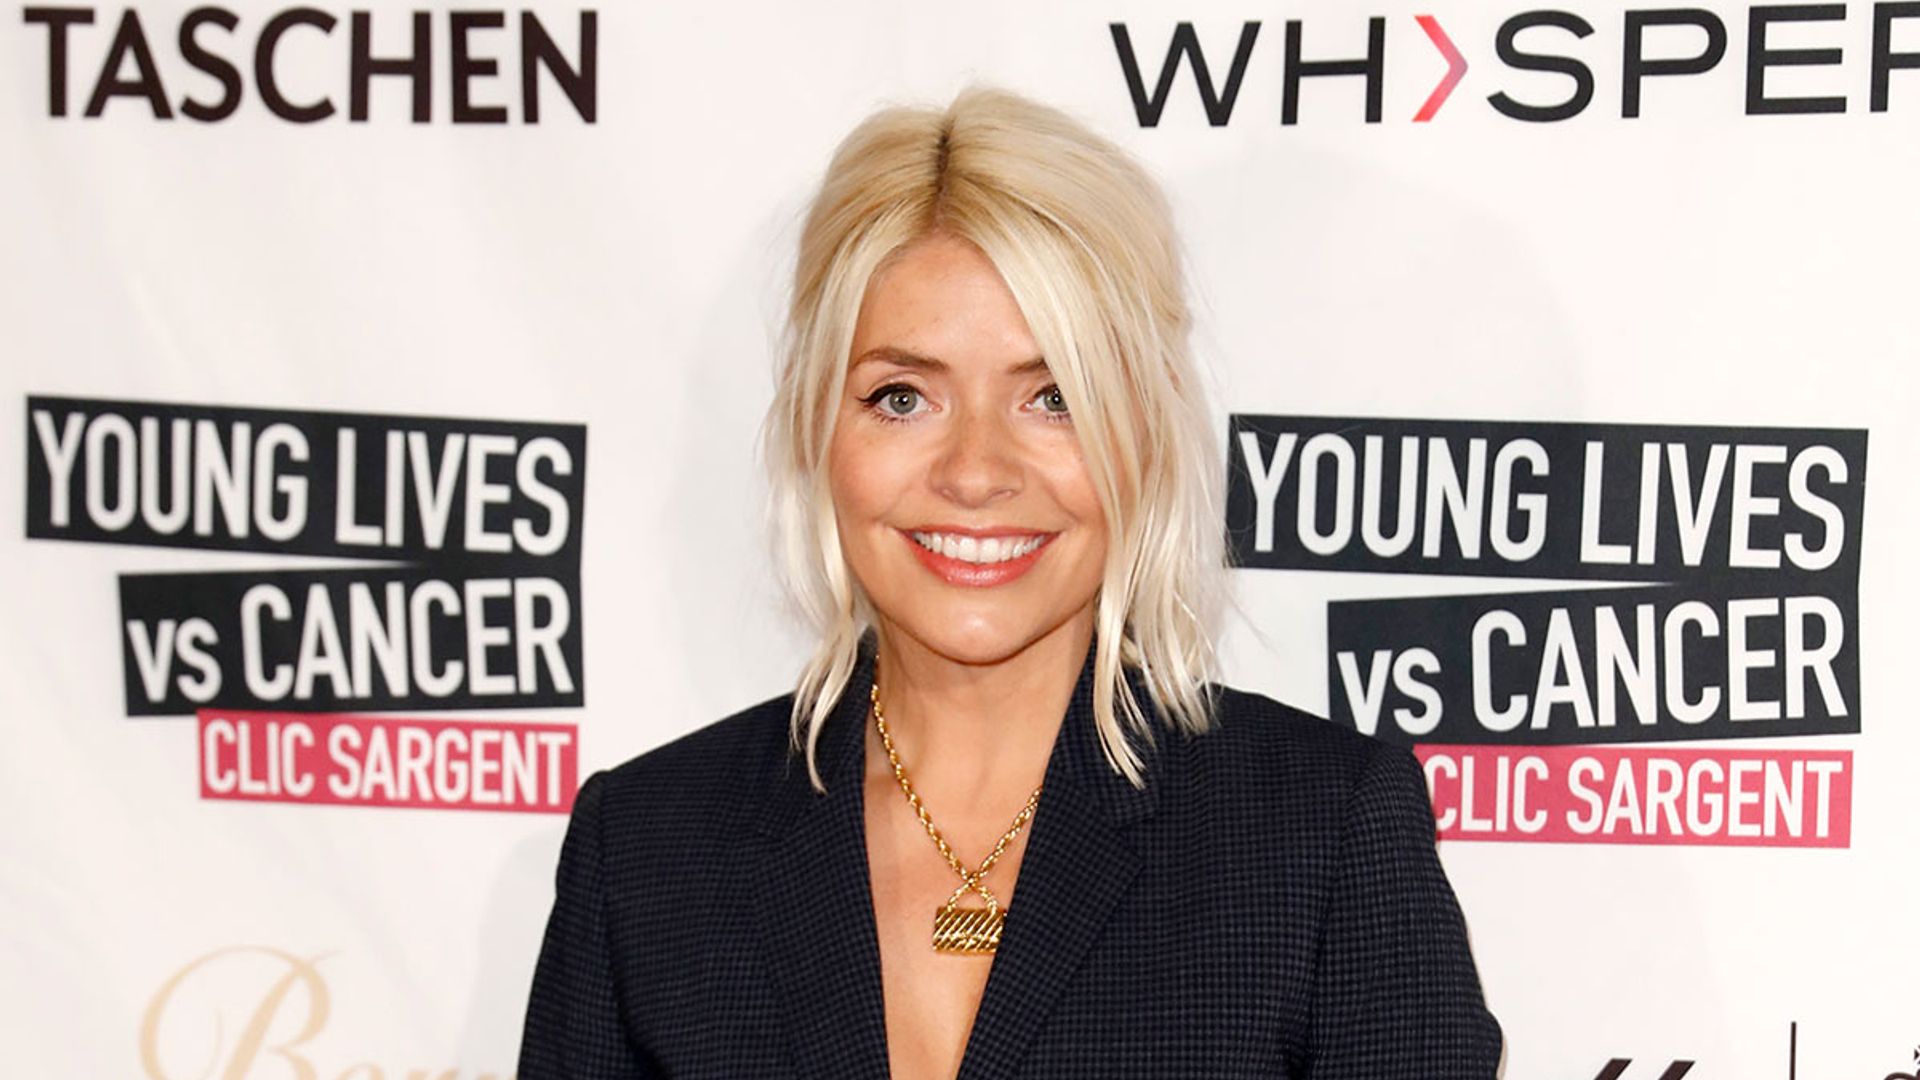 Holly Willoughby wears a leather skirt on This Morning.